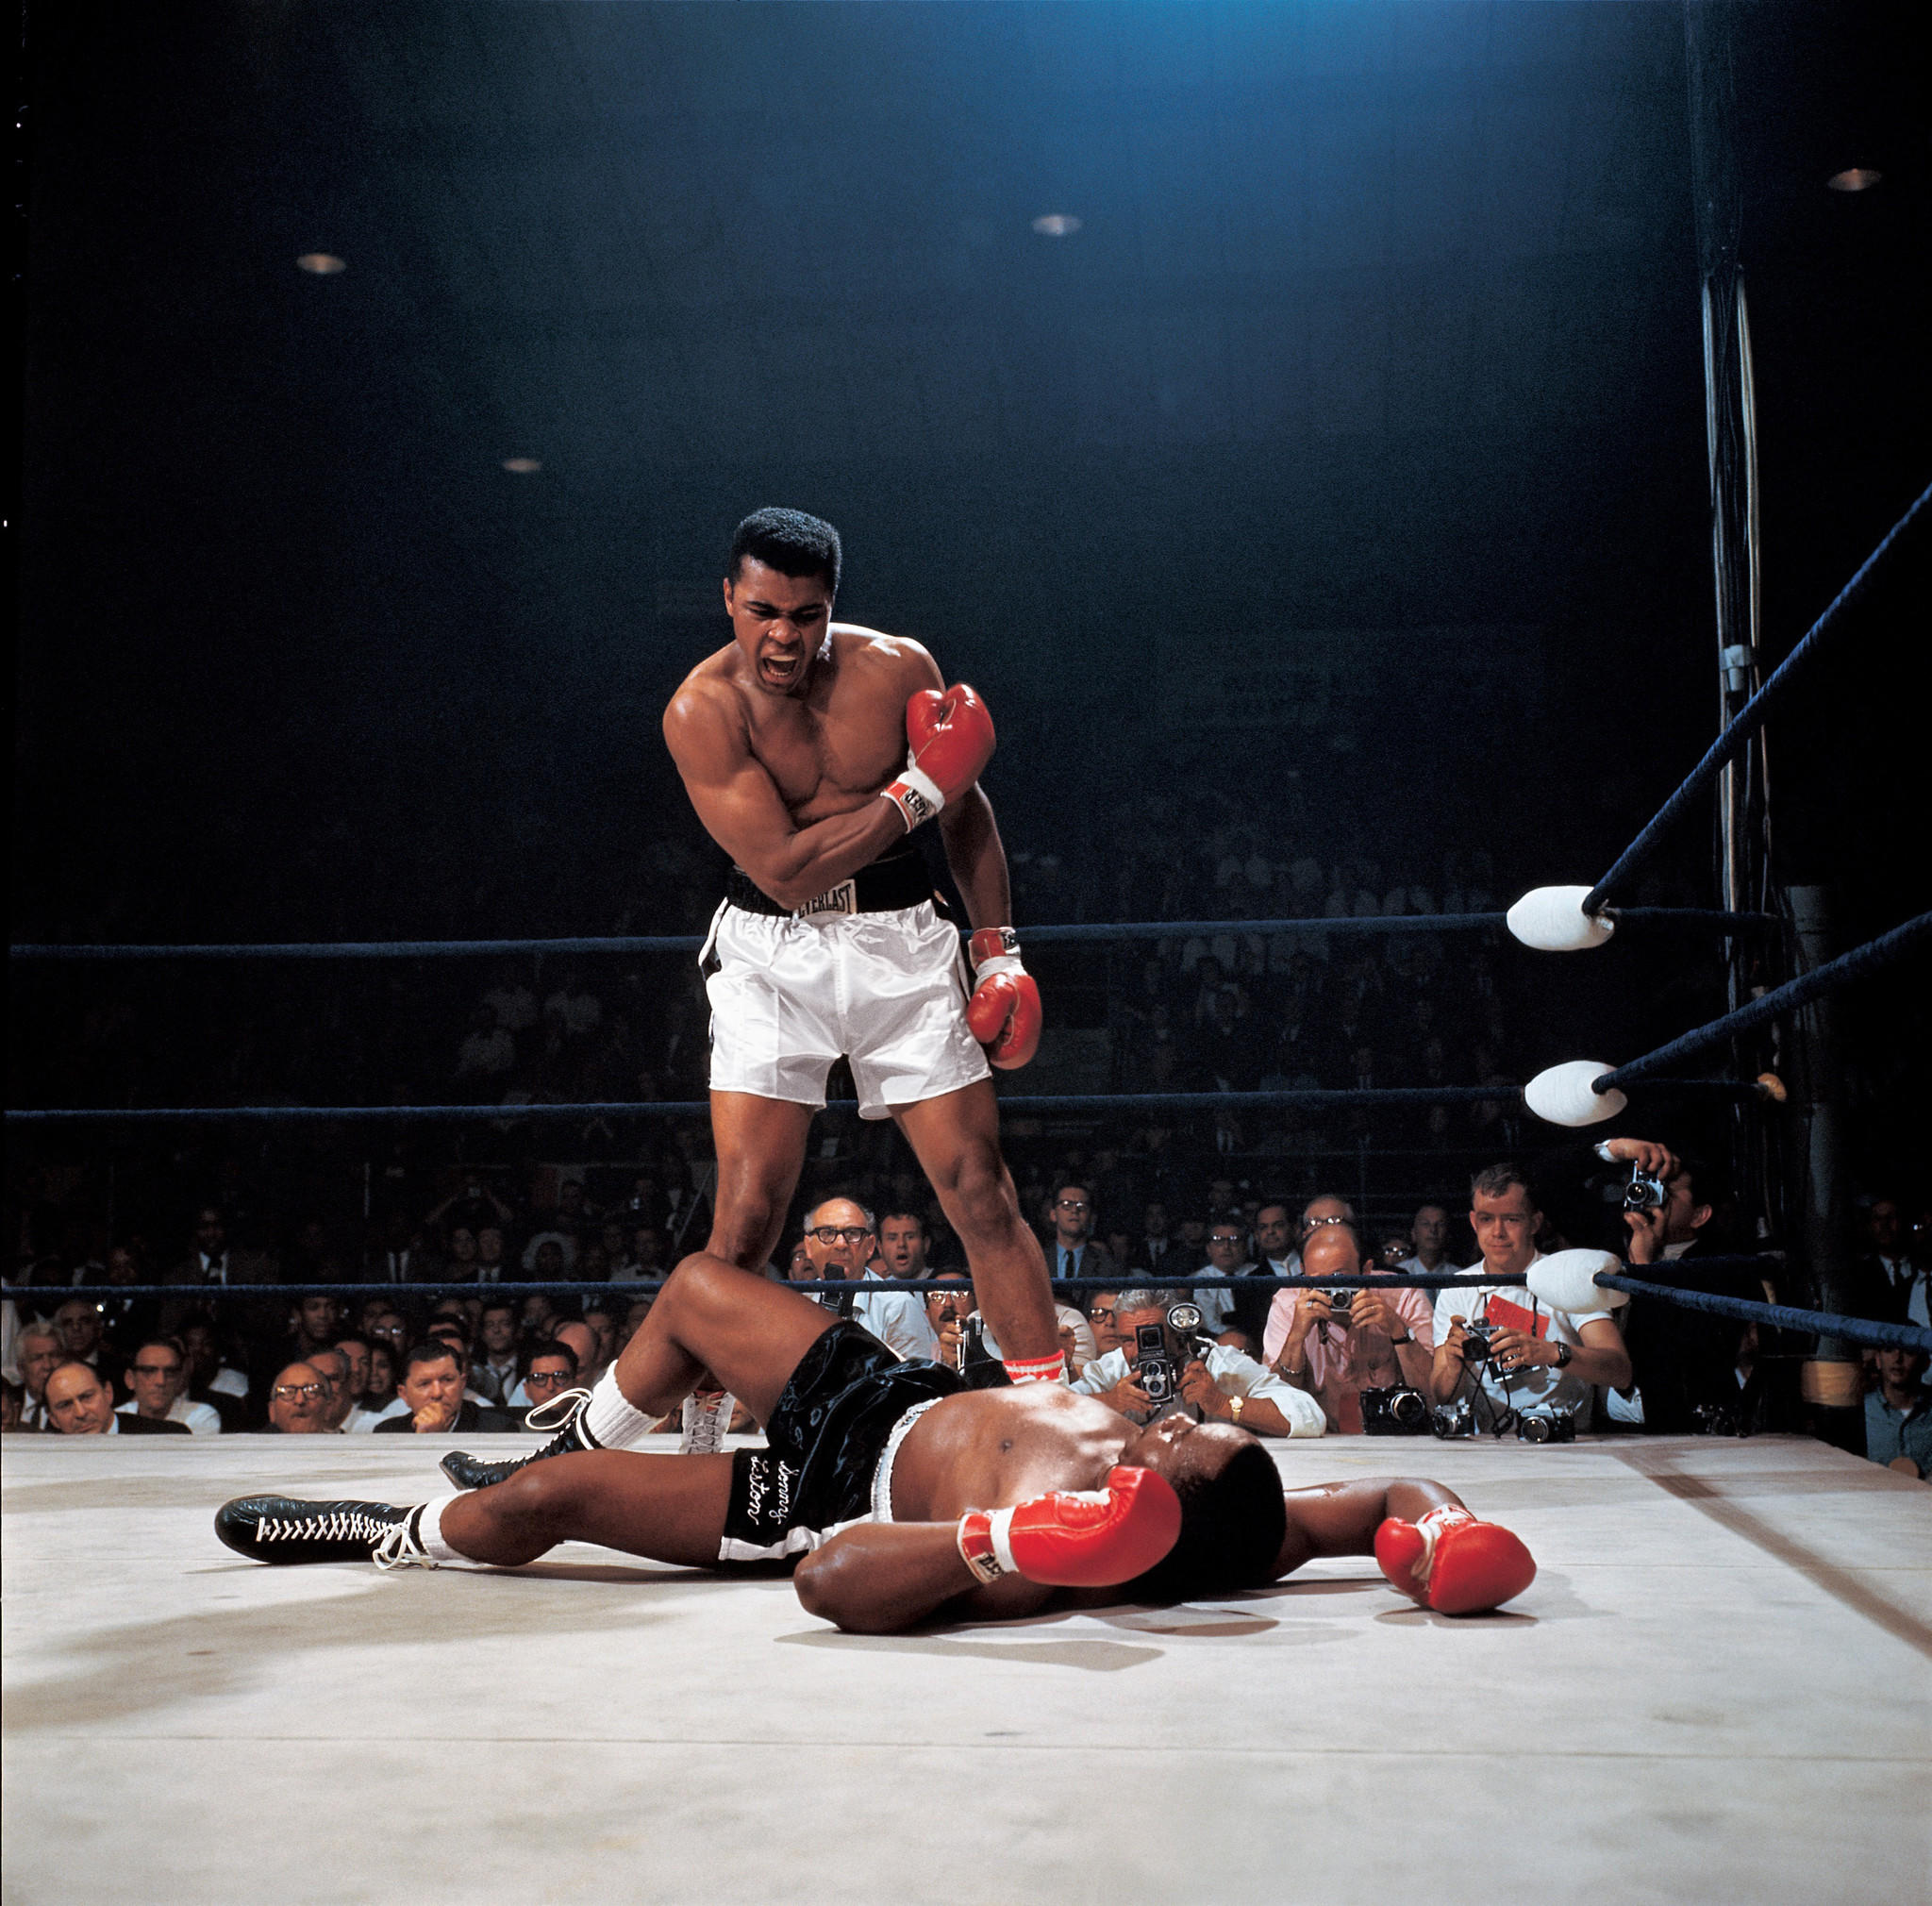 Muhammad Ali .. Boxing legend, activist against racism | What's Goin On